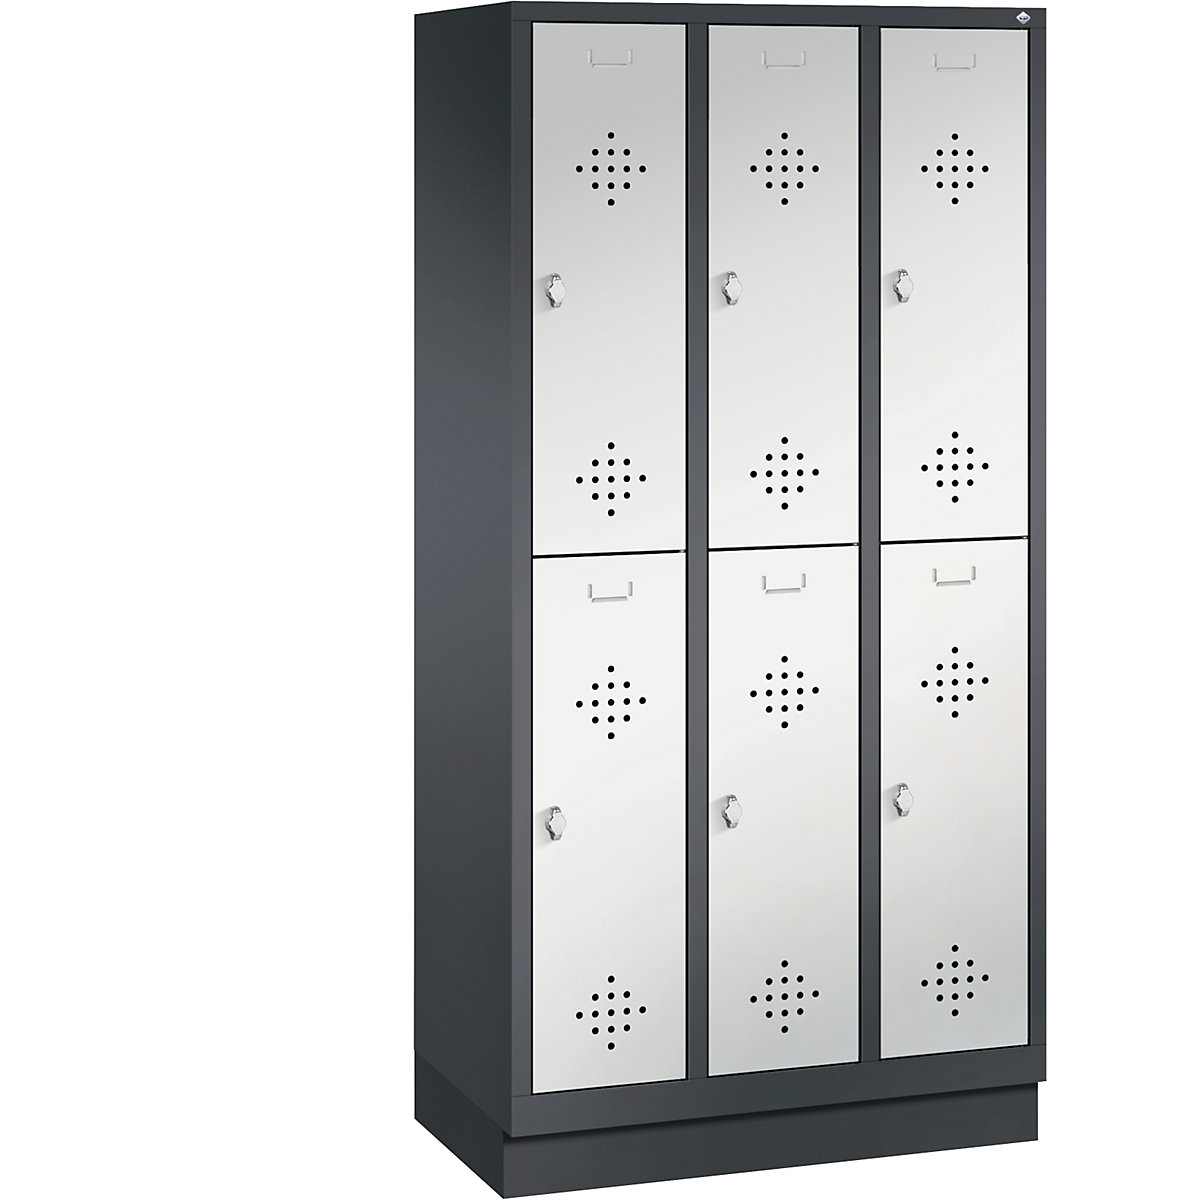 CLASSIC cloakroom locker with plinth, double tier – C+P, 3 compartments, 2 shelf compartments each, compartment width 300 mm, black grey / light grey-14